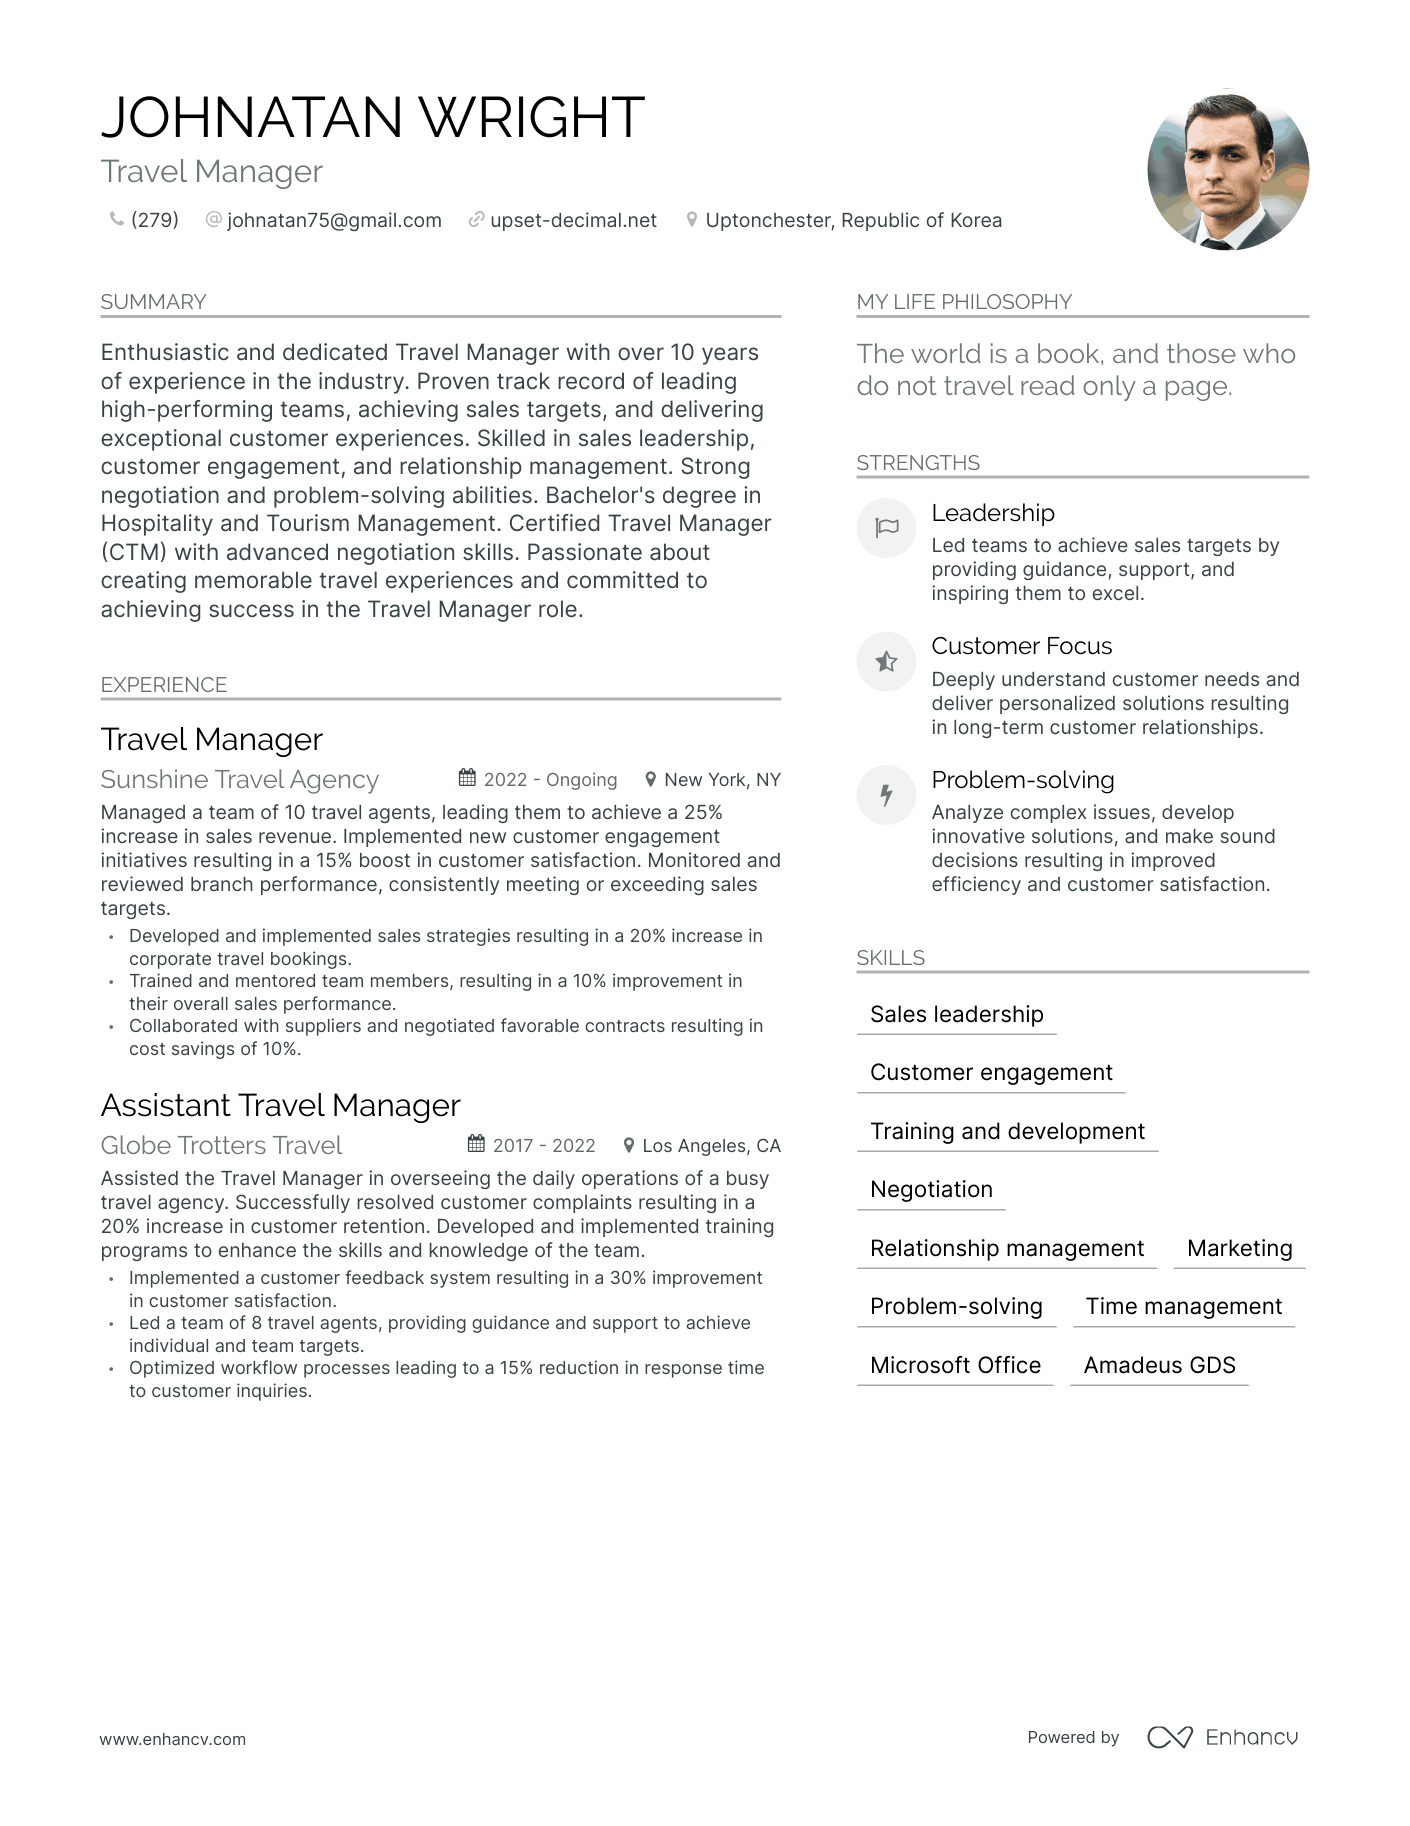 Travel Manager resume example